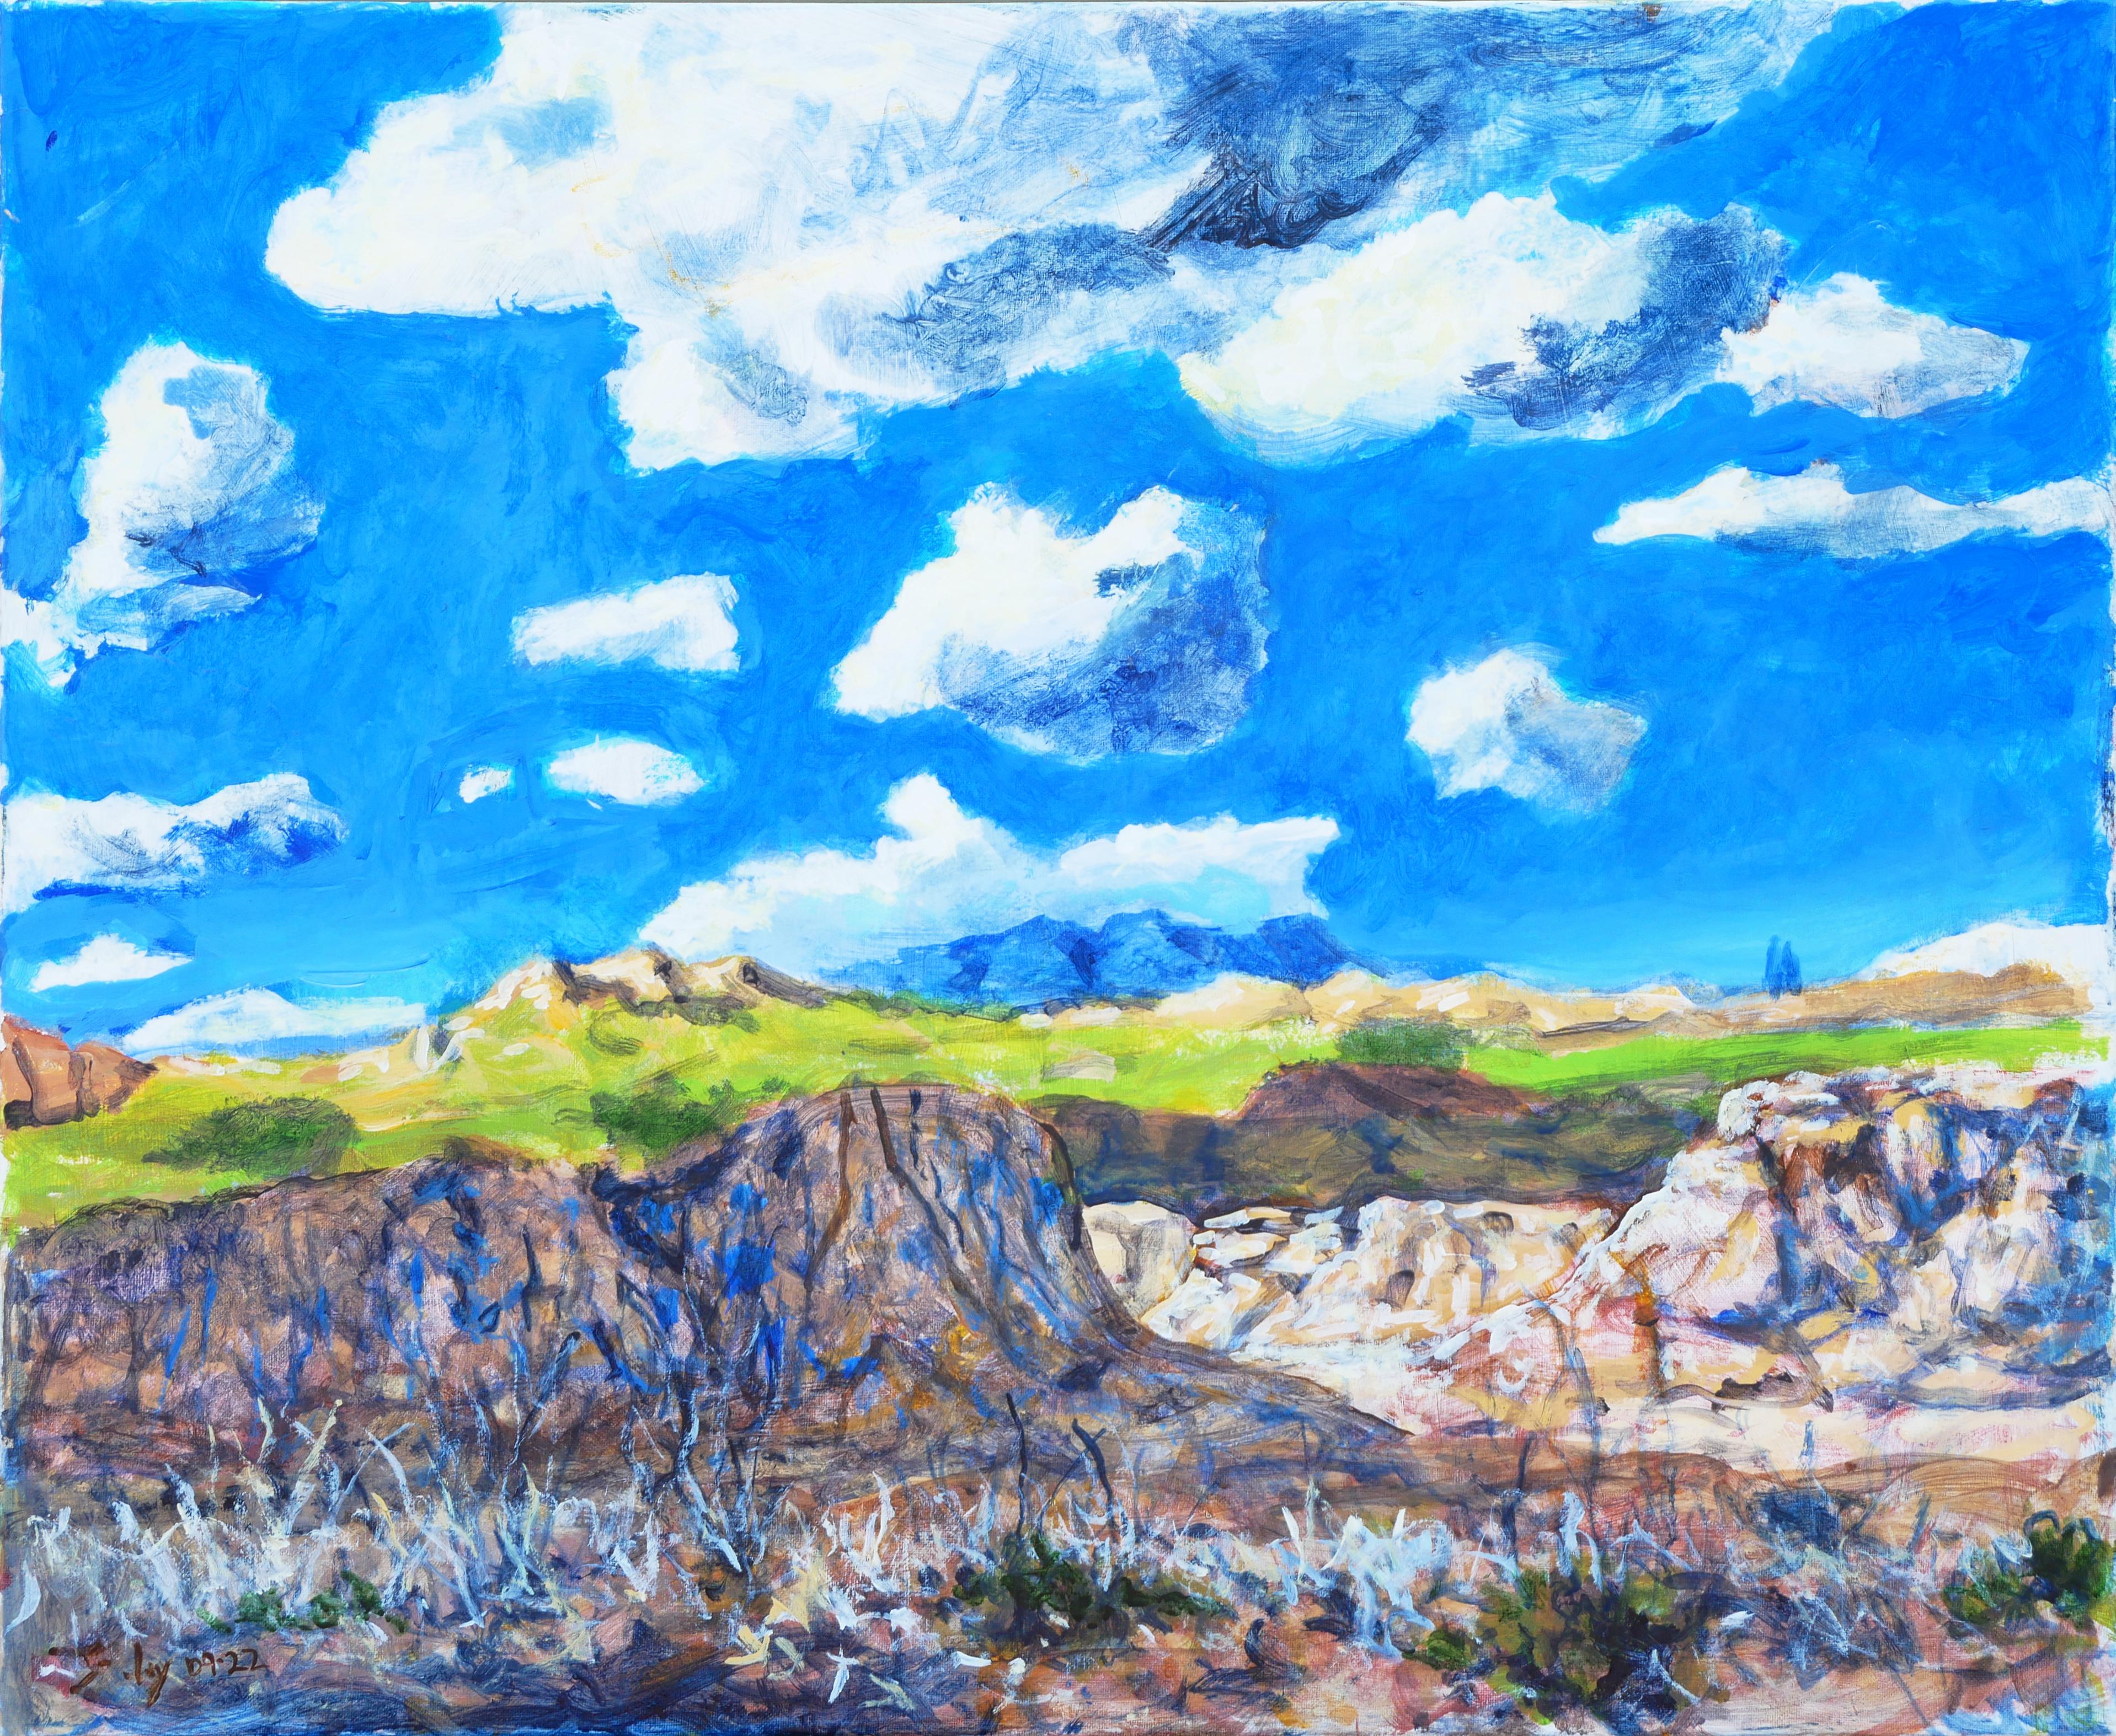 Earl Staley Landscape Painting - "Chisos Mts. From the West Big Bend, TX" Blue-Toned Abstract Southern Landscape